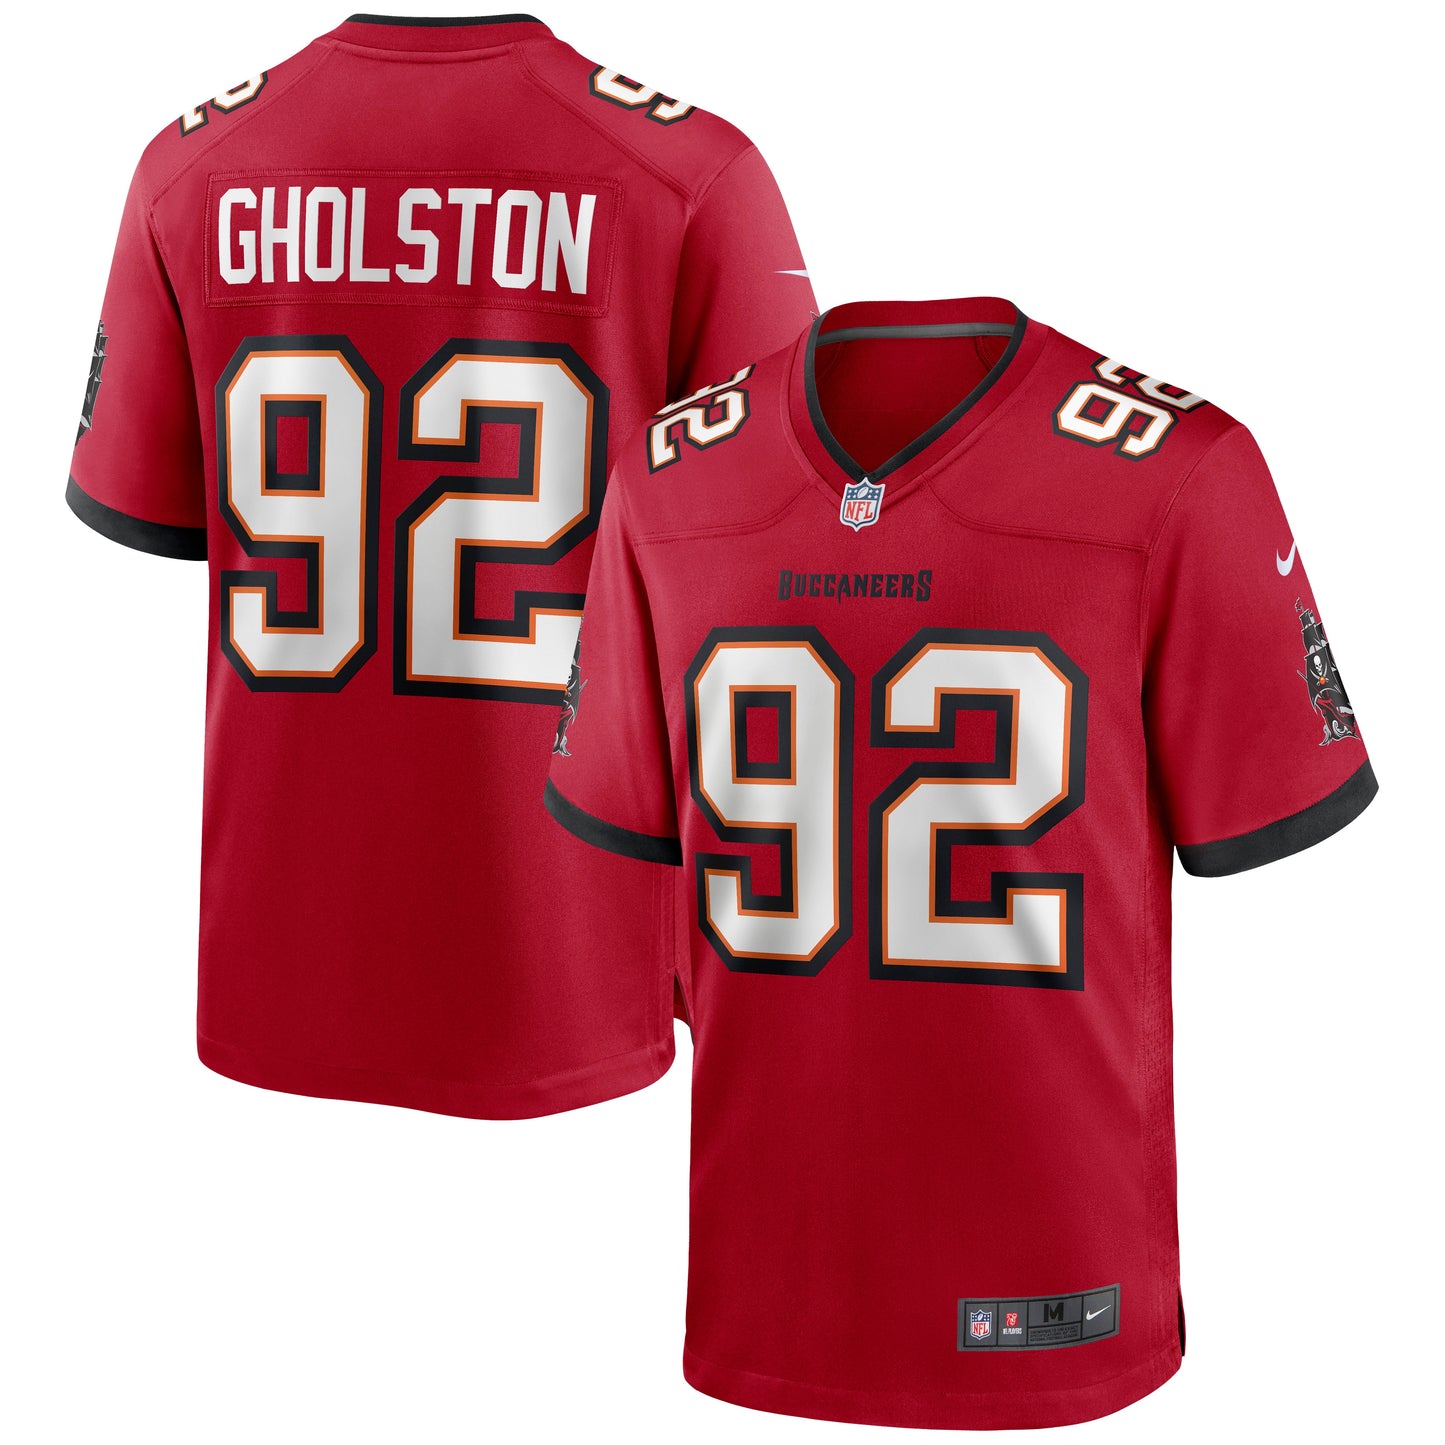 William Gholston Tampa Bay Buccaneers Nike Game Jersey - Red